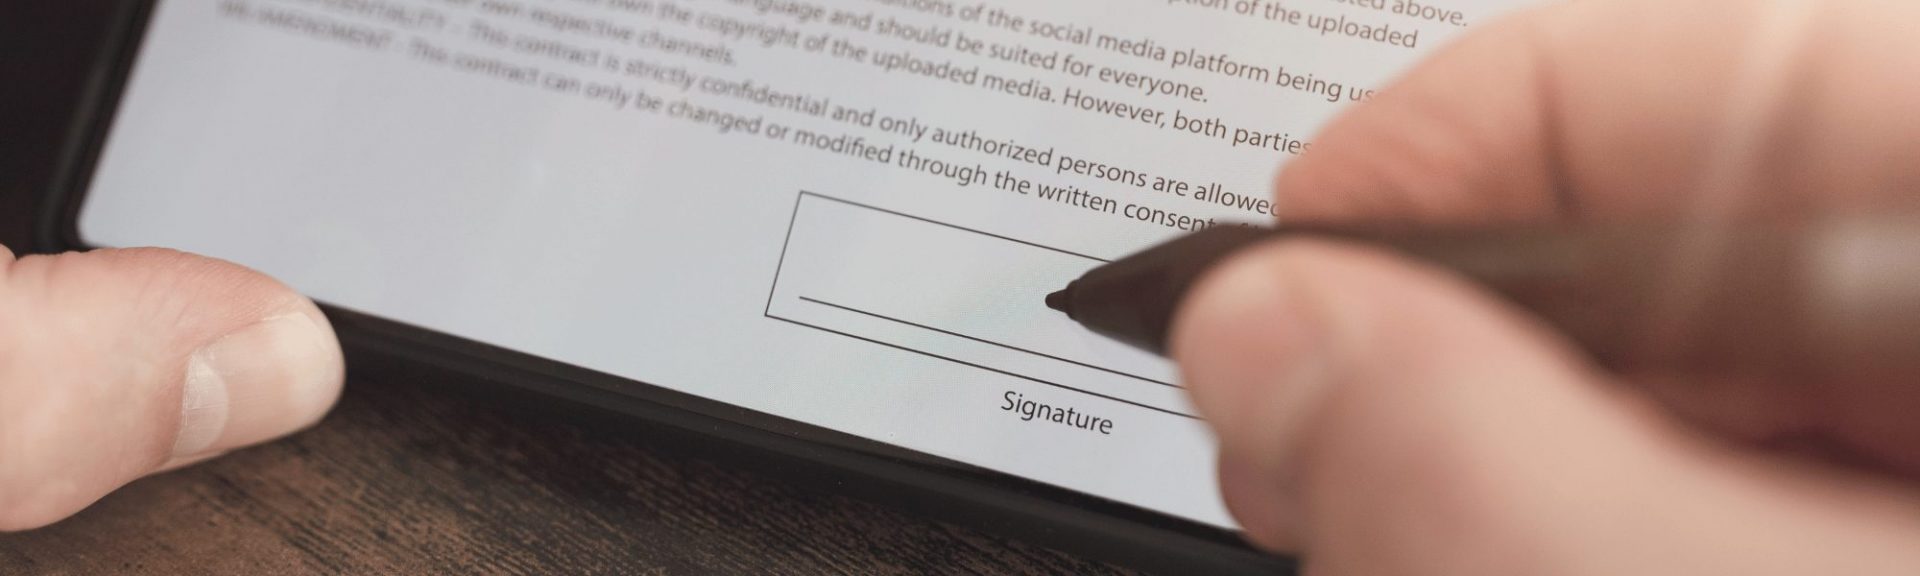 person signing document on a tablet device